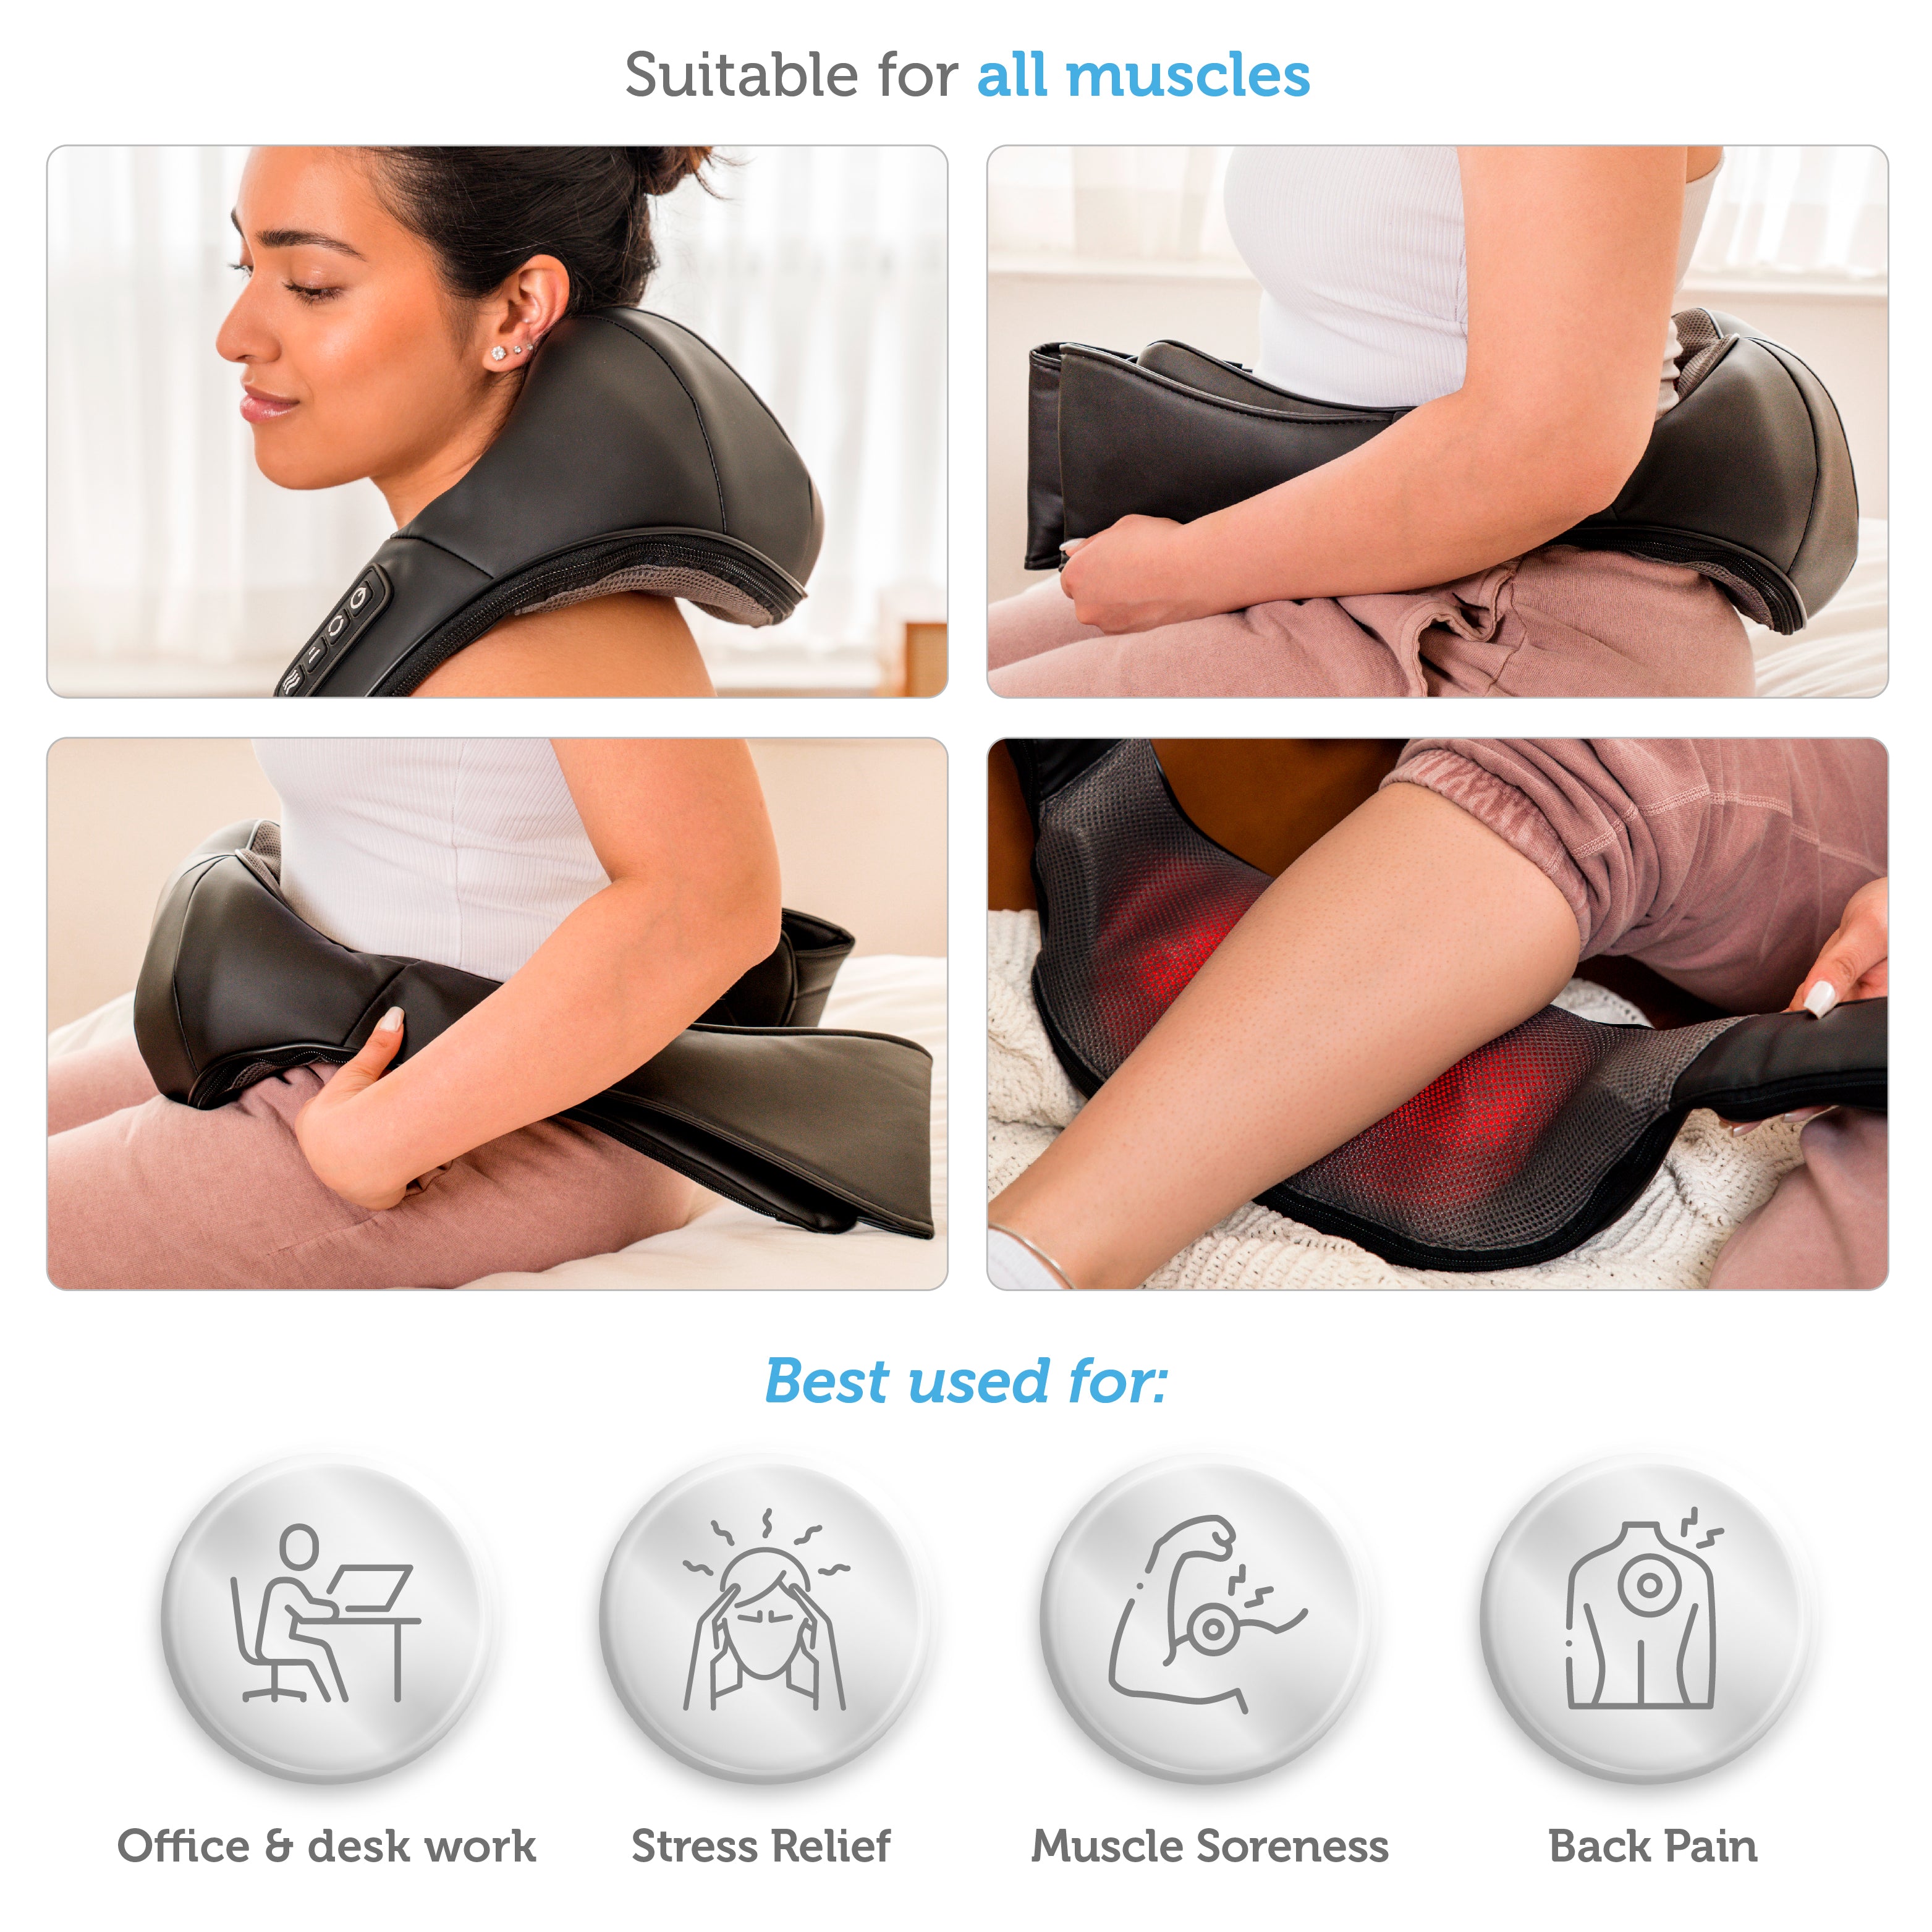 Shiatsu Back and Neck Massager with Heat,Electric Deep Tissue 3D Kneading  Massage Pillow for Shoulder, Legs, Foot and Body, Relax Gifts for Women Men  Mom Dad Black